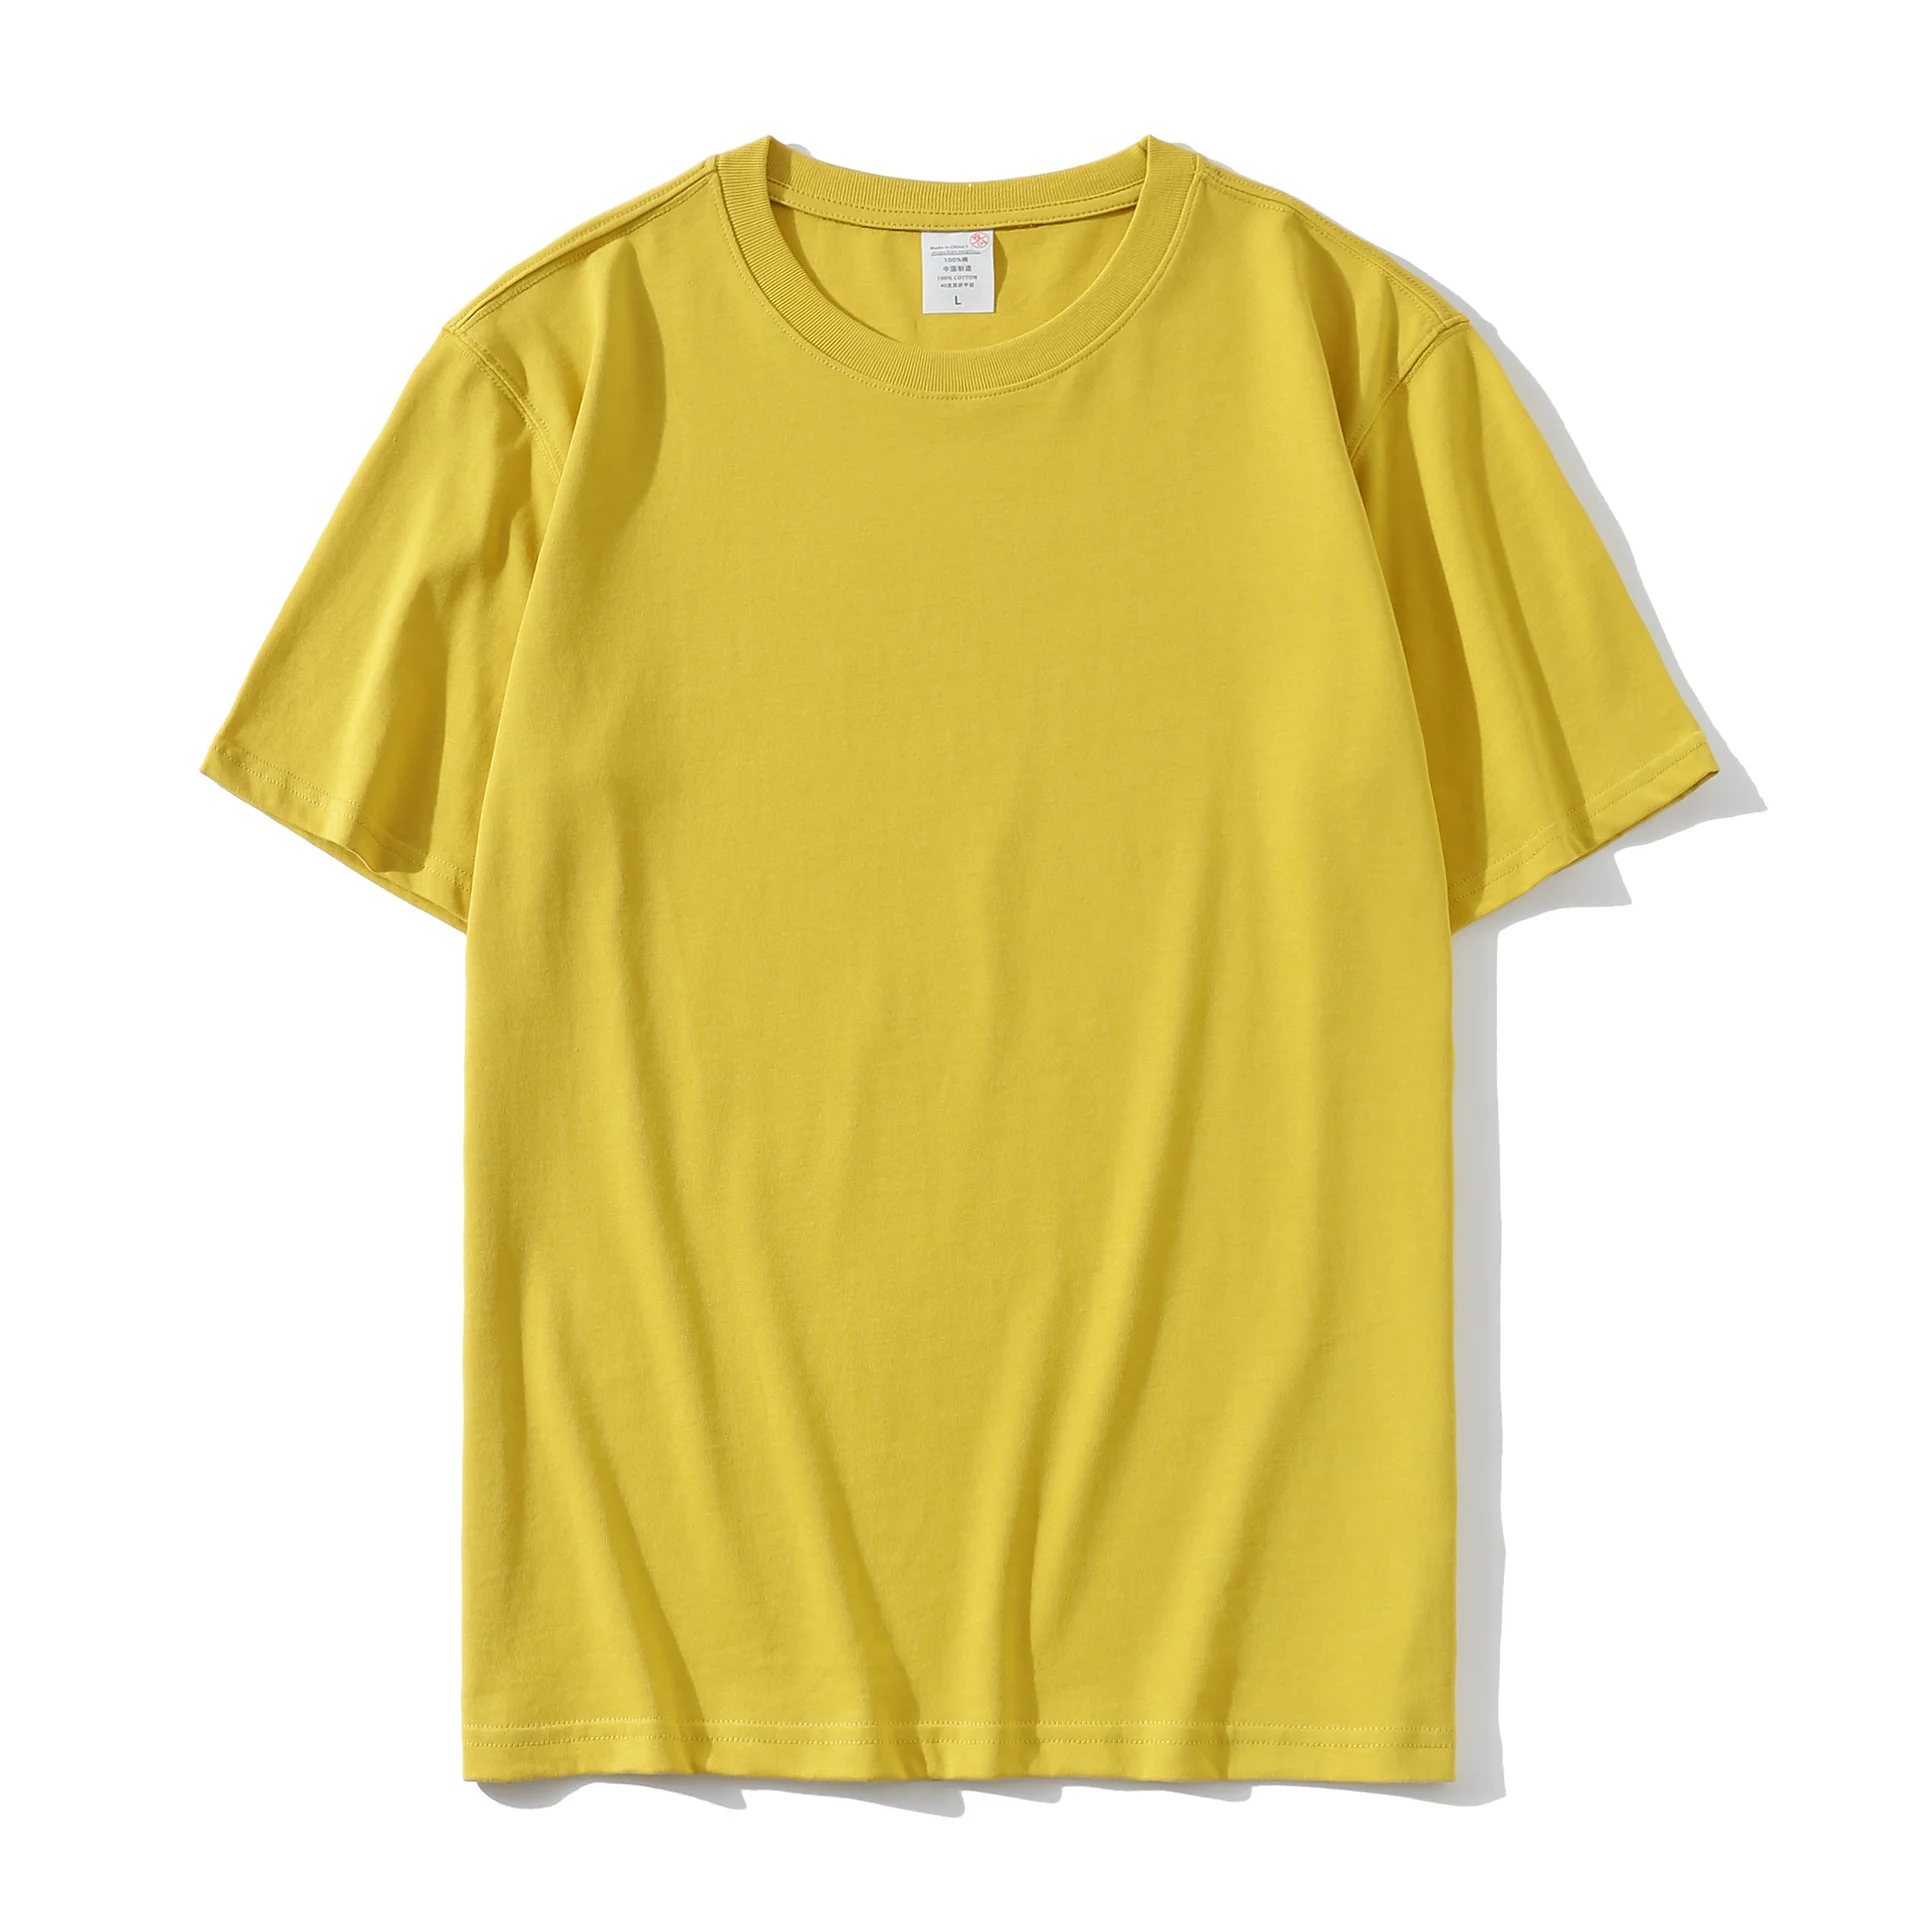 unbranded t-shirts - Bangladesh Factory, Suppliers, Manufacturers